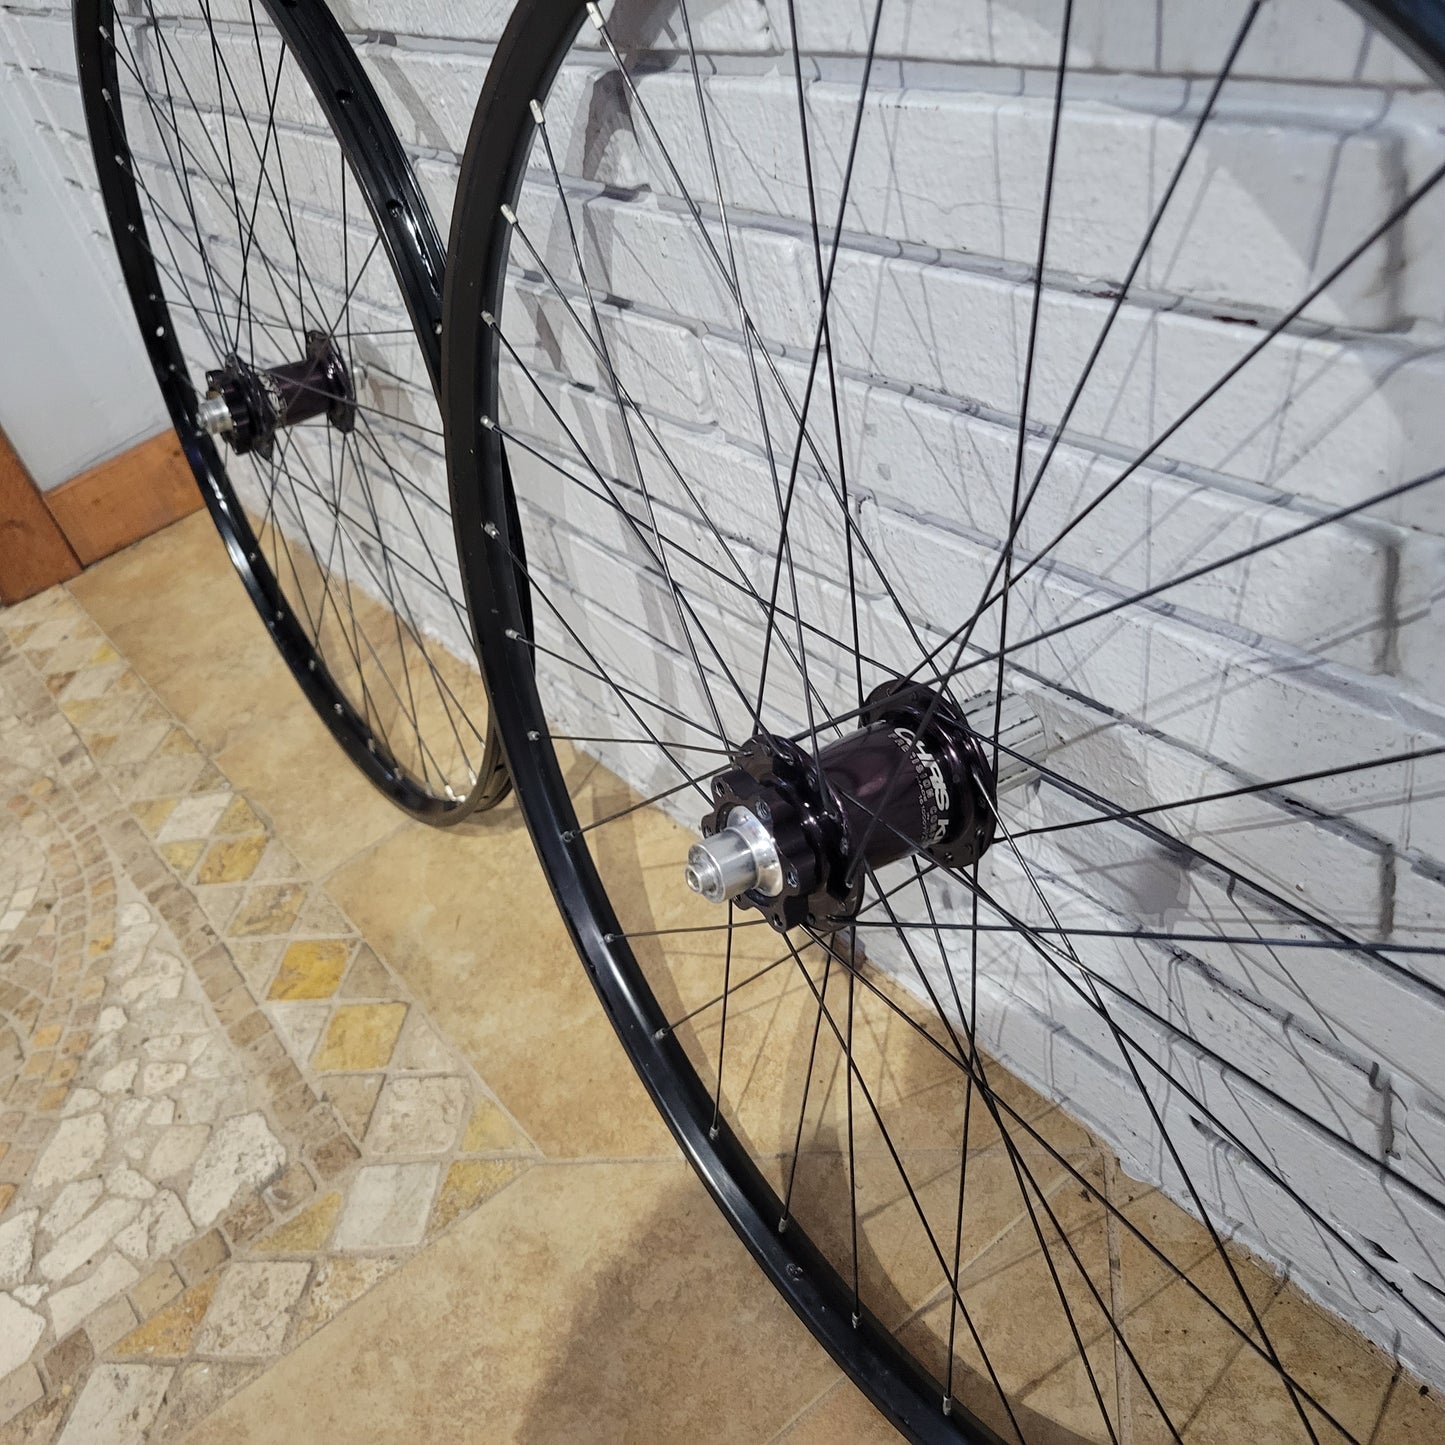 Chris King / Stans Arch wheelset 26"